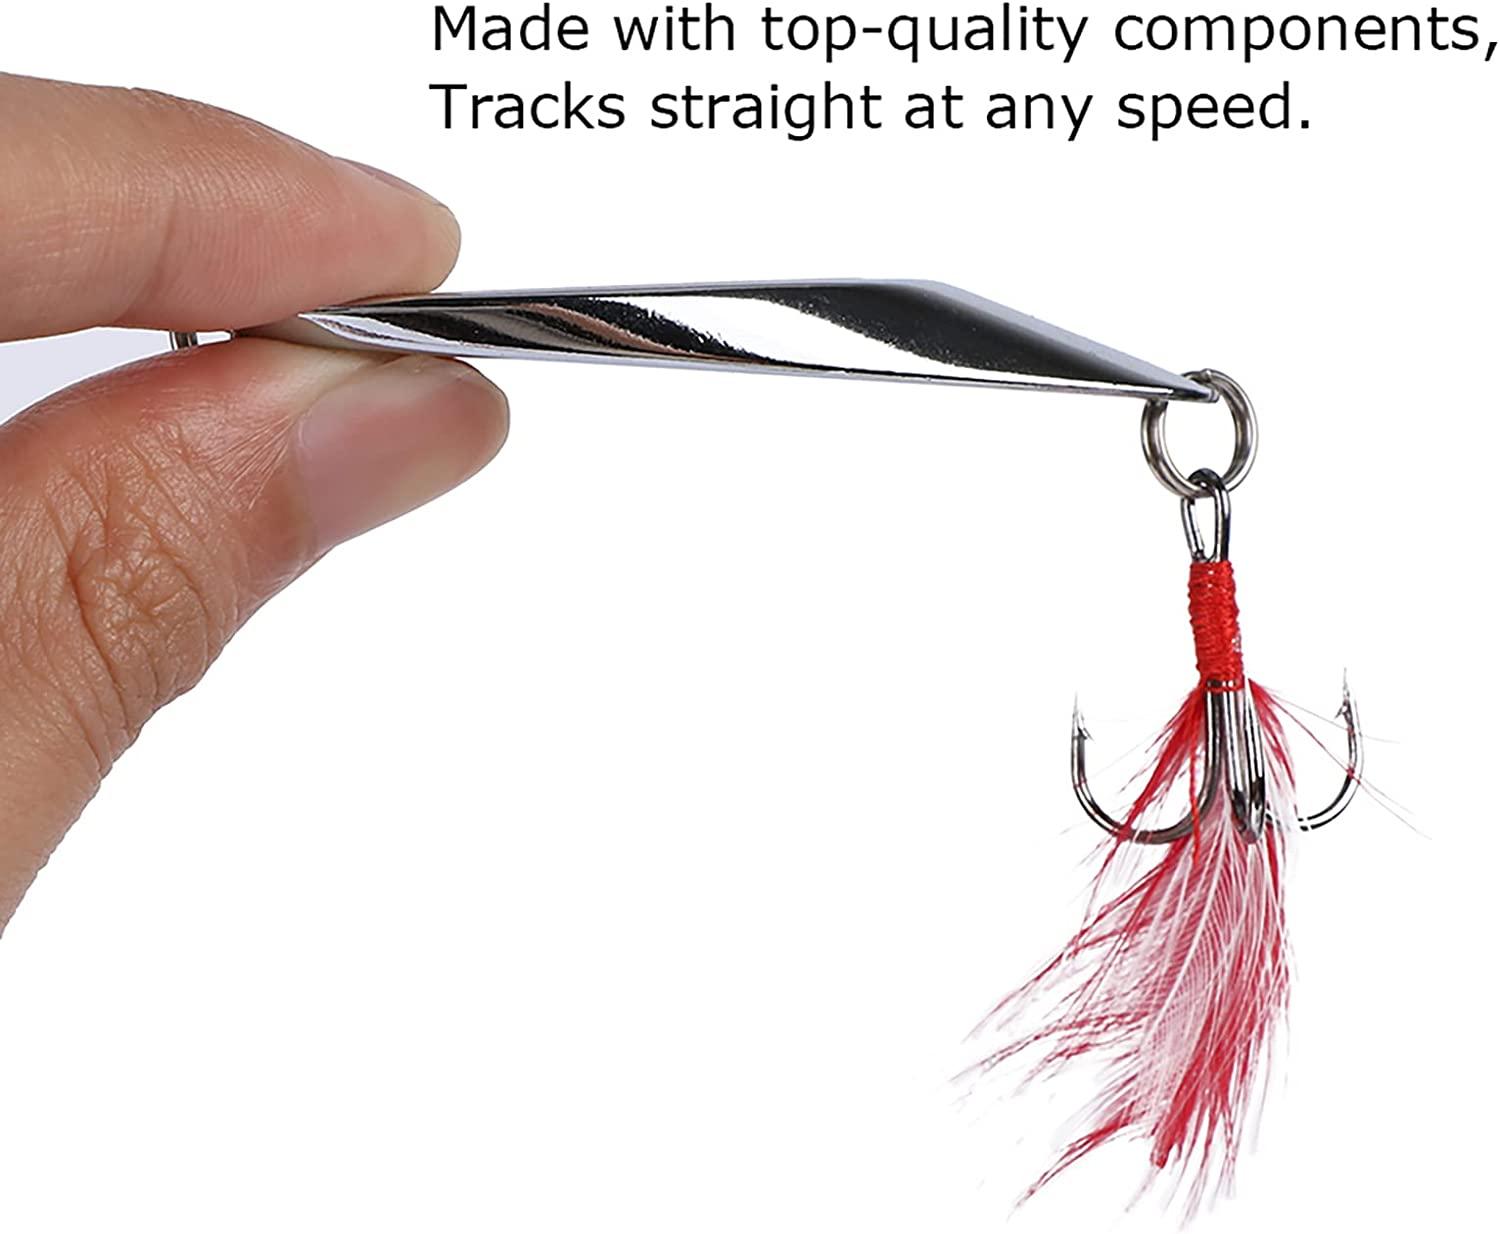 Goture Fishing Spoon Lure Reflective Fishing Jigs Fishing Lures for Panfish, Sunfish, Bluegill, Walleye, Crappie, Pike TroutBass, Size: A-3CM-0.1OZ-5(